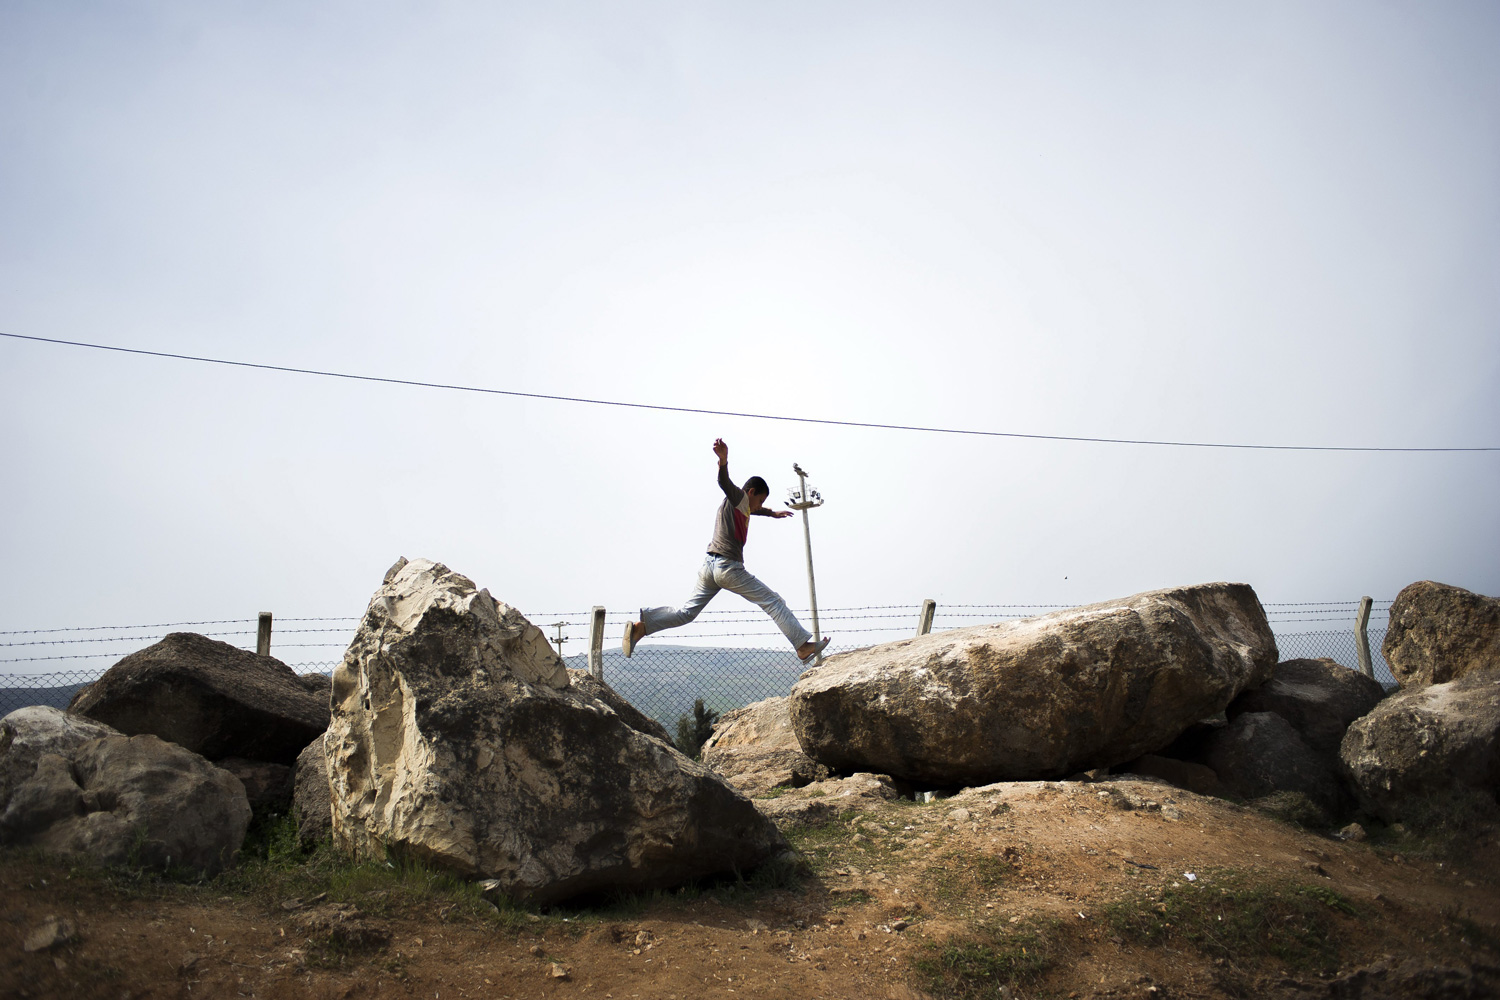 March 25, 2012. A Syrian refugee is seen leaping from rock to rock at the Reyhanli refugees camp in Turkey.